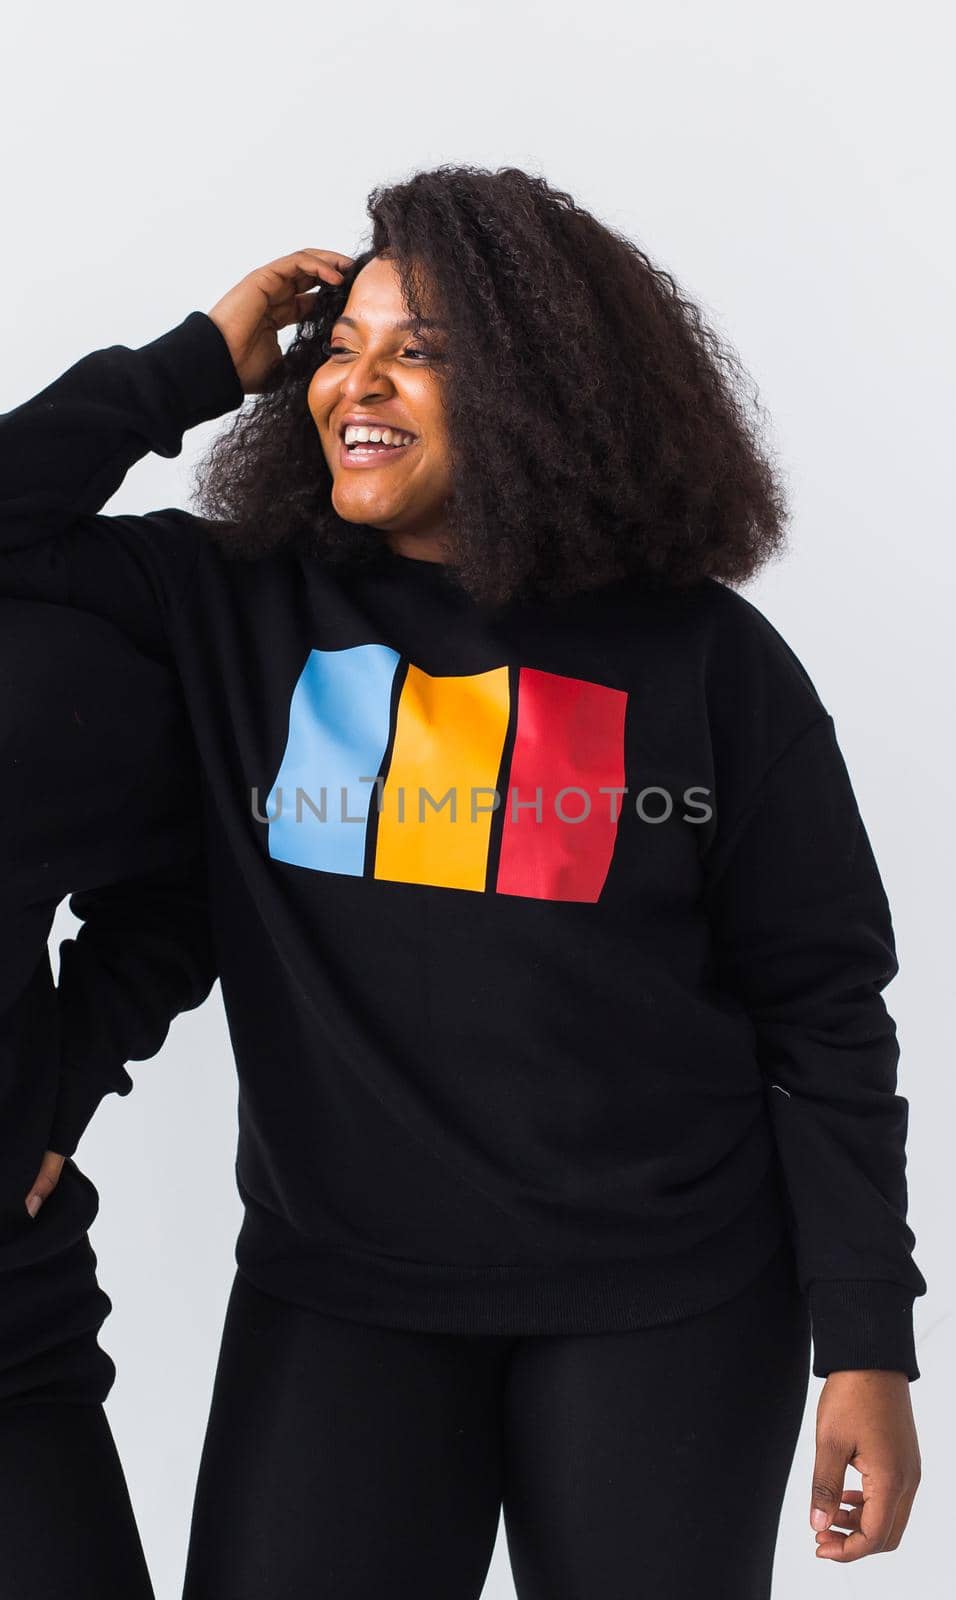 Young beautiful african american girl with an afro hairstyle. Portrait on white background. Girl looking at camera